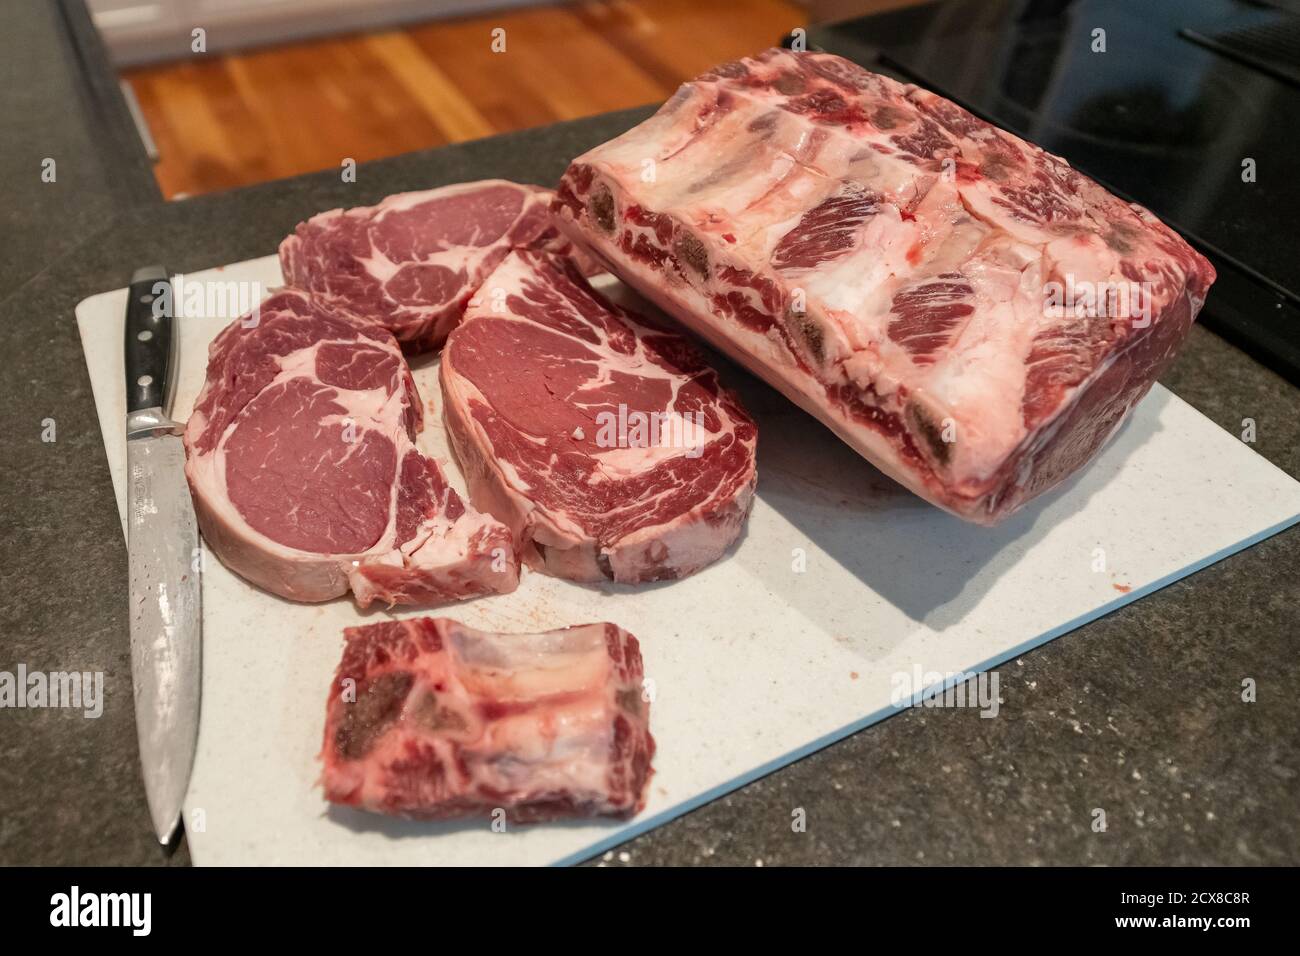 Raw beef prime rib roasts, steaks and ribs with thick pieces of meat, the marbling of fat and rib bones. Stock Photo